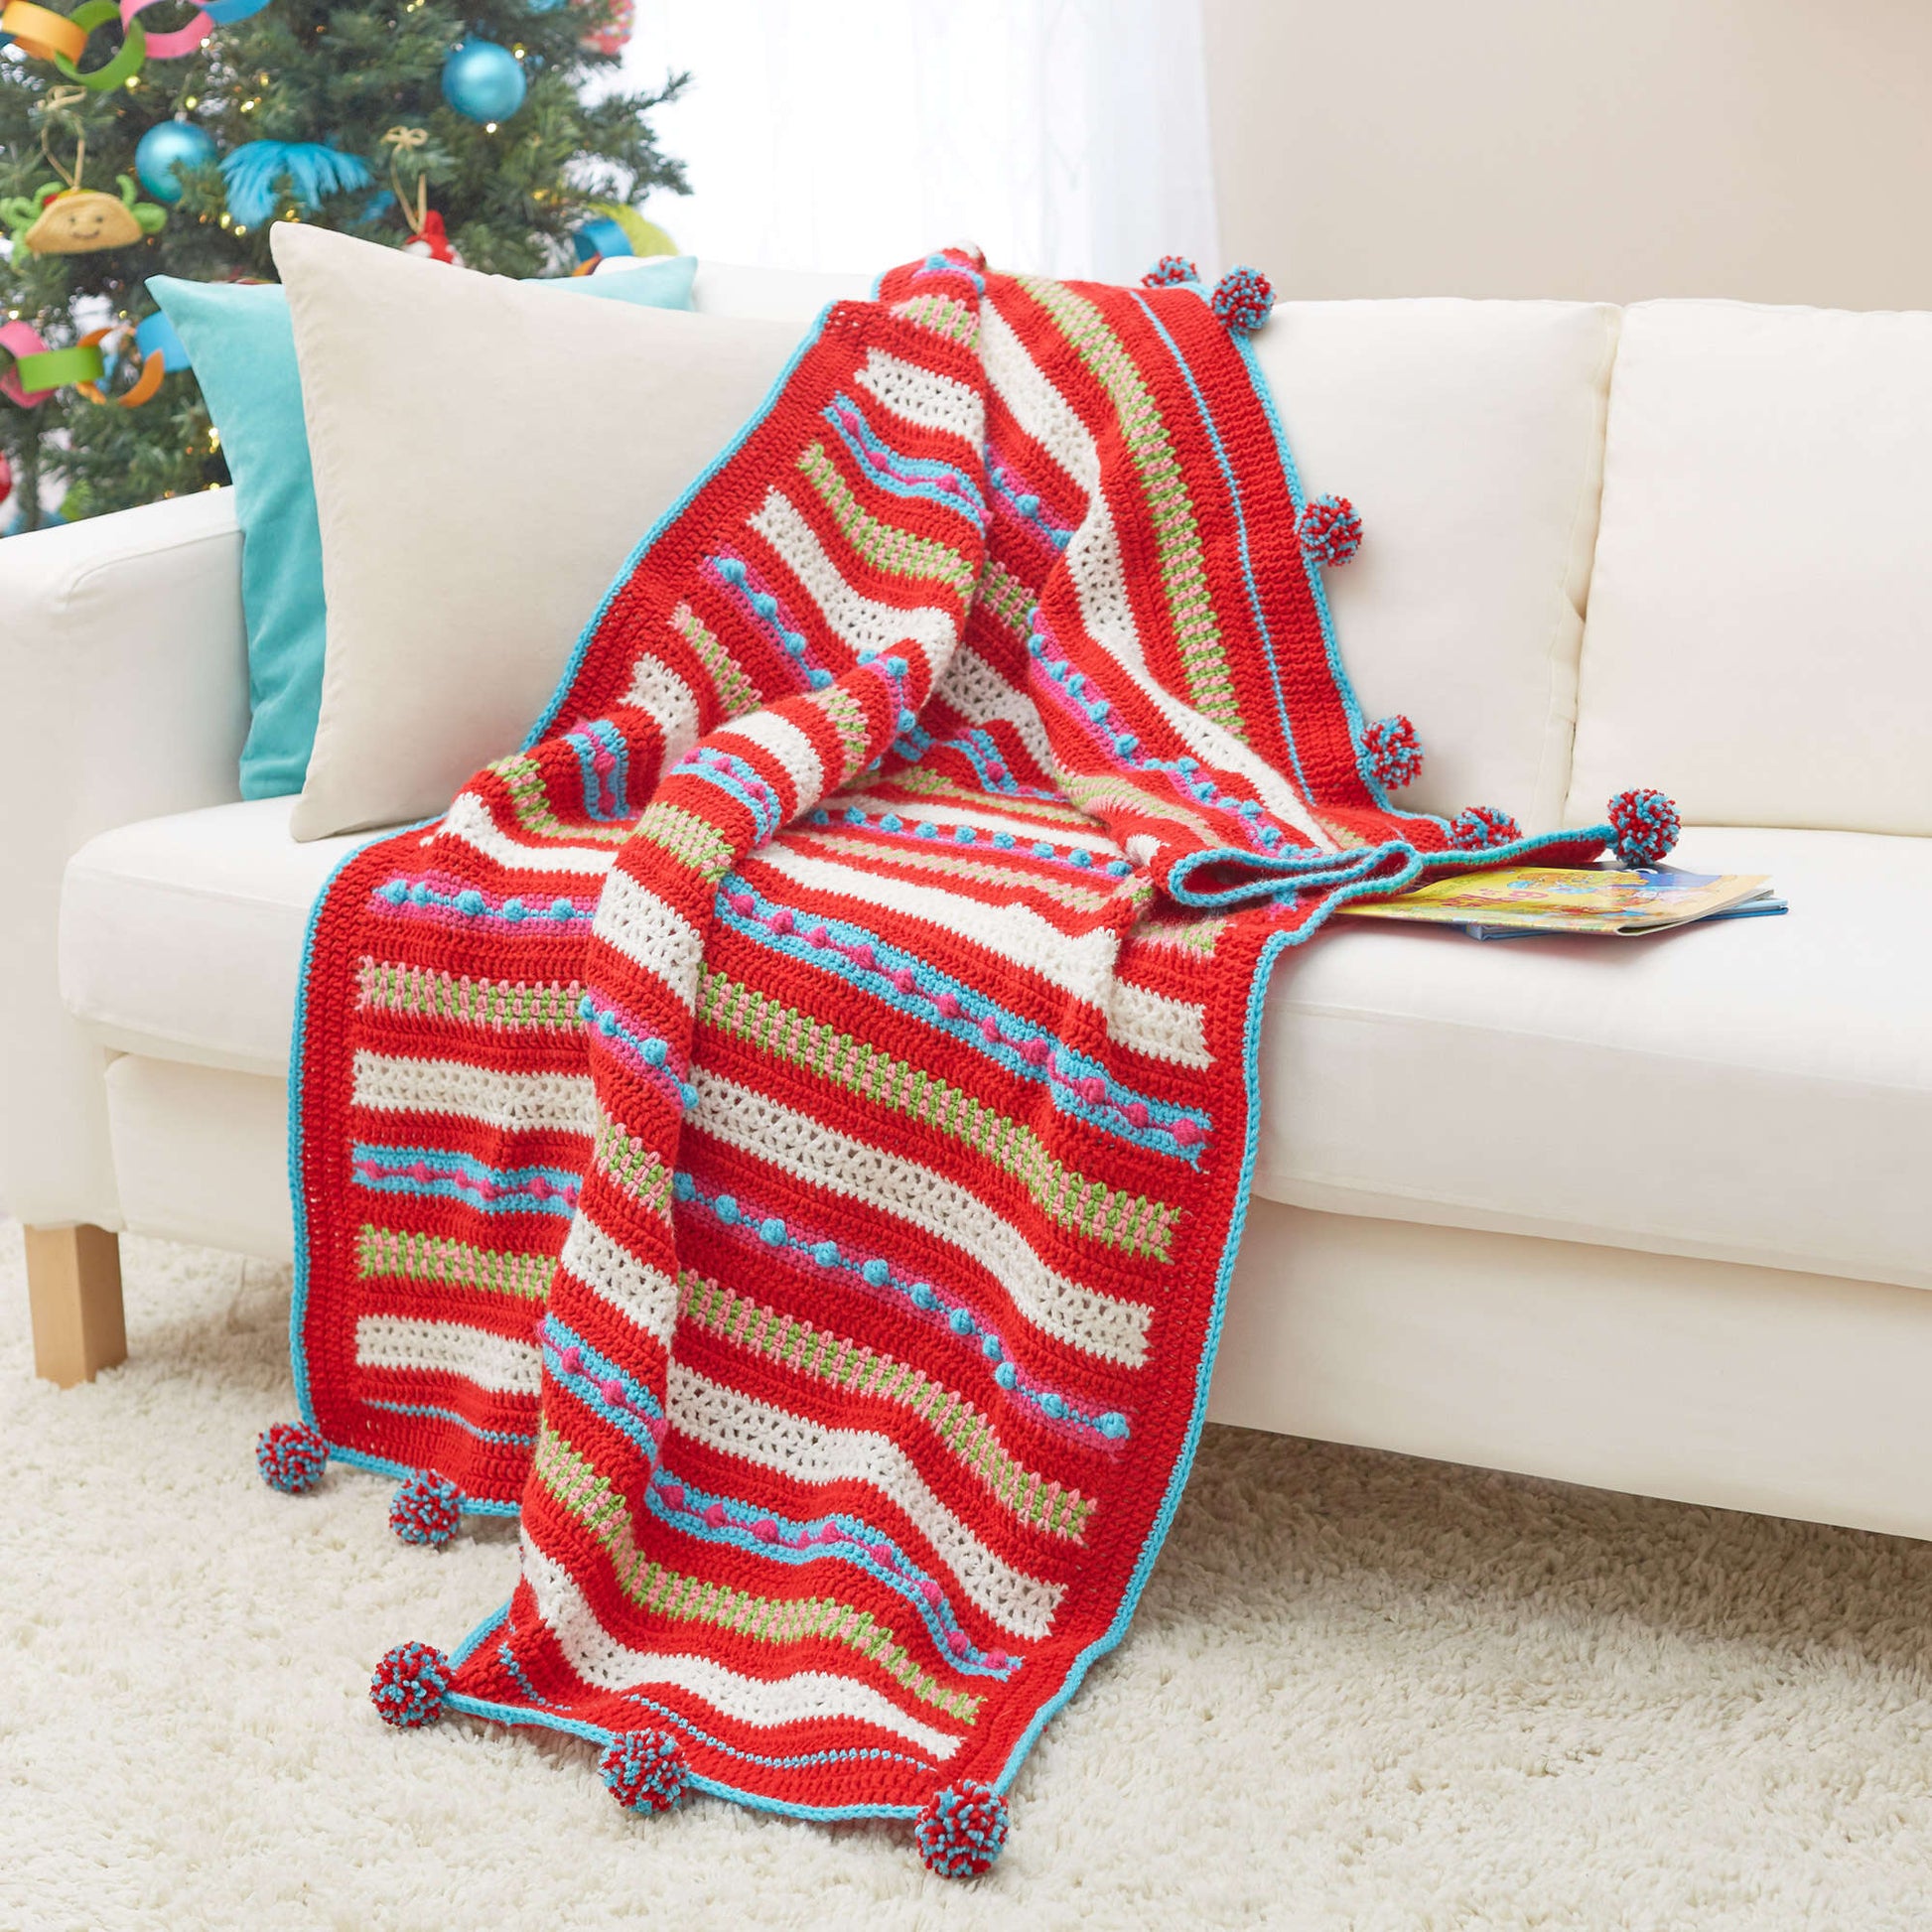 Free Red Heart Crochet Christmas Morning Striped Throw Pattern